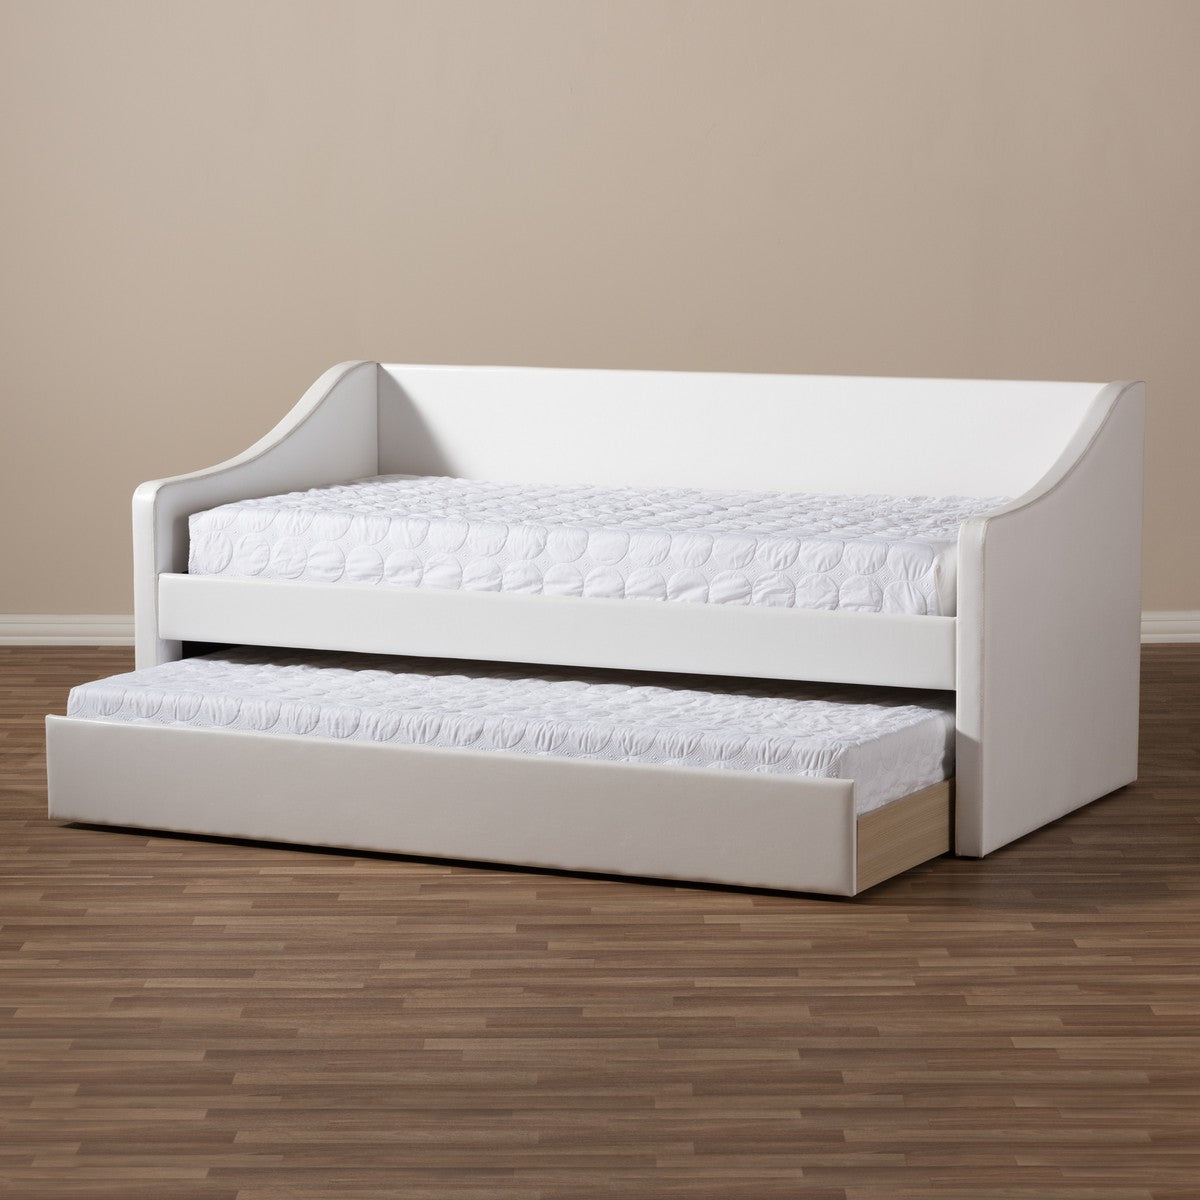 Baxton Studio Barnstorm Modern and Contemporary White Faux Leather Upholstered Daybed with Guest Trundle Bed